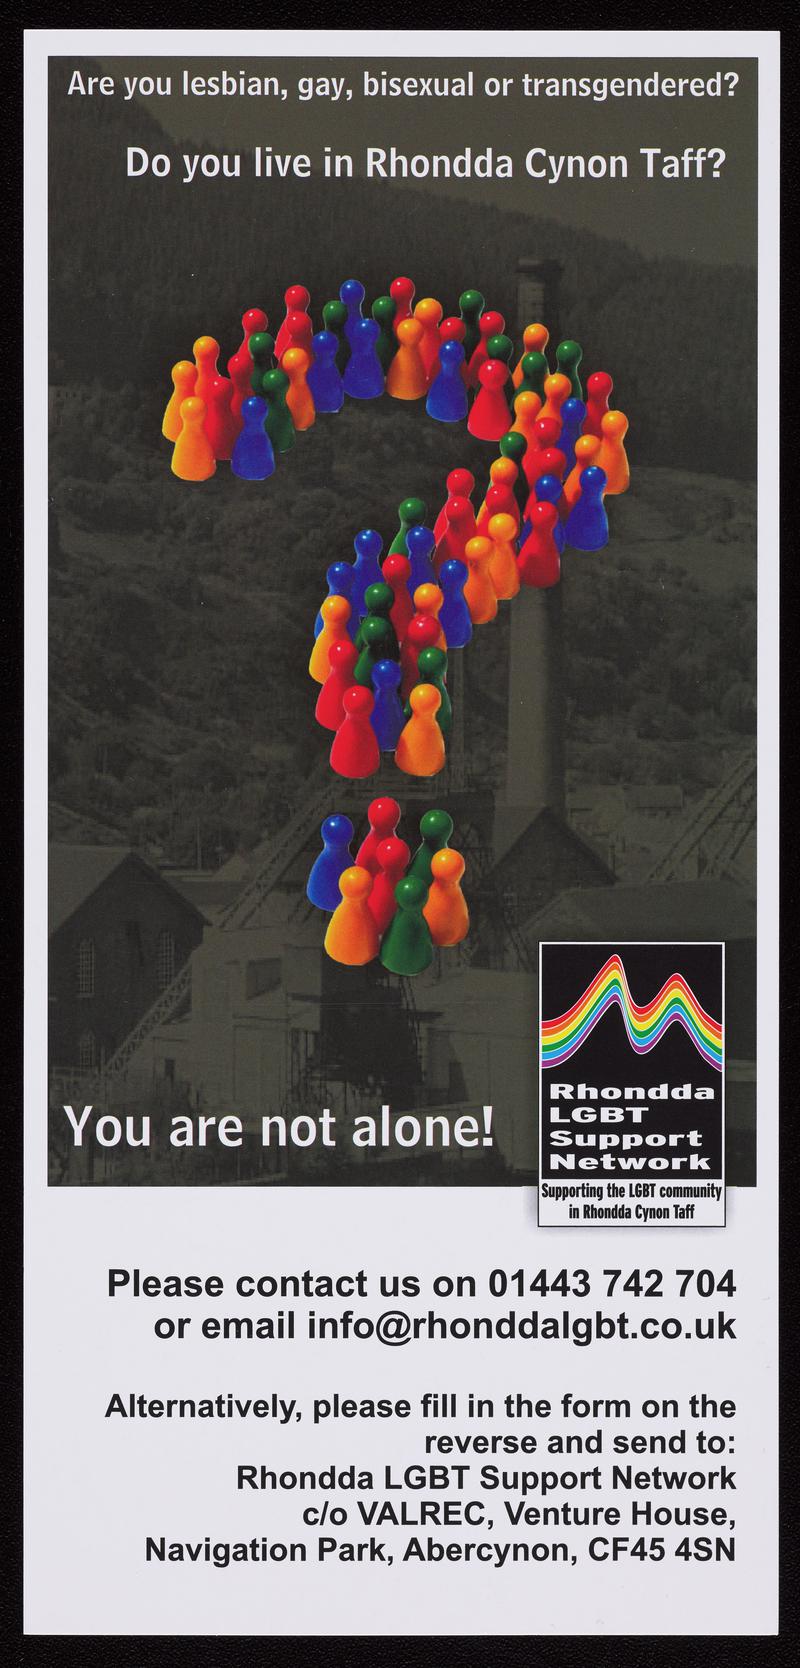 Leaflet and Member Application to join Rhondda LGBT Support Network.